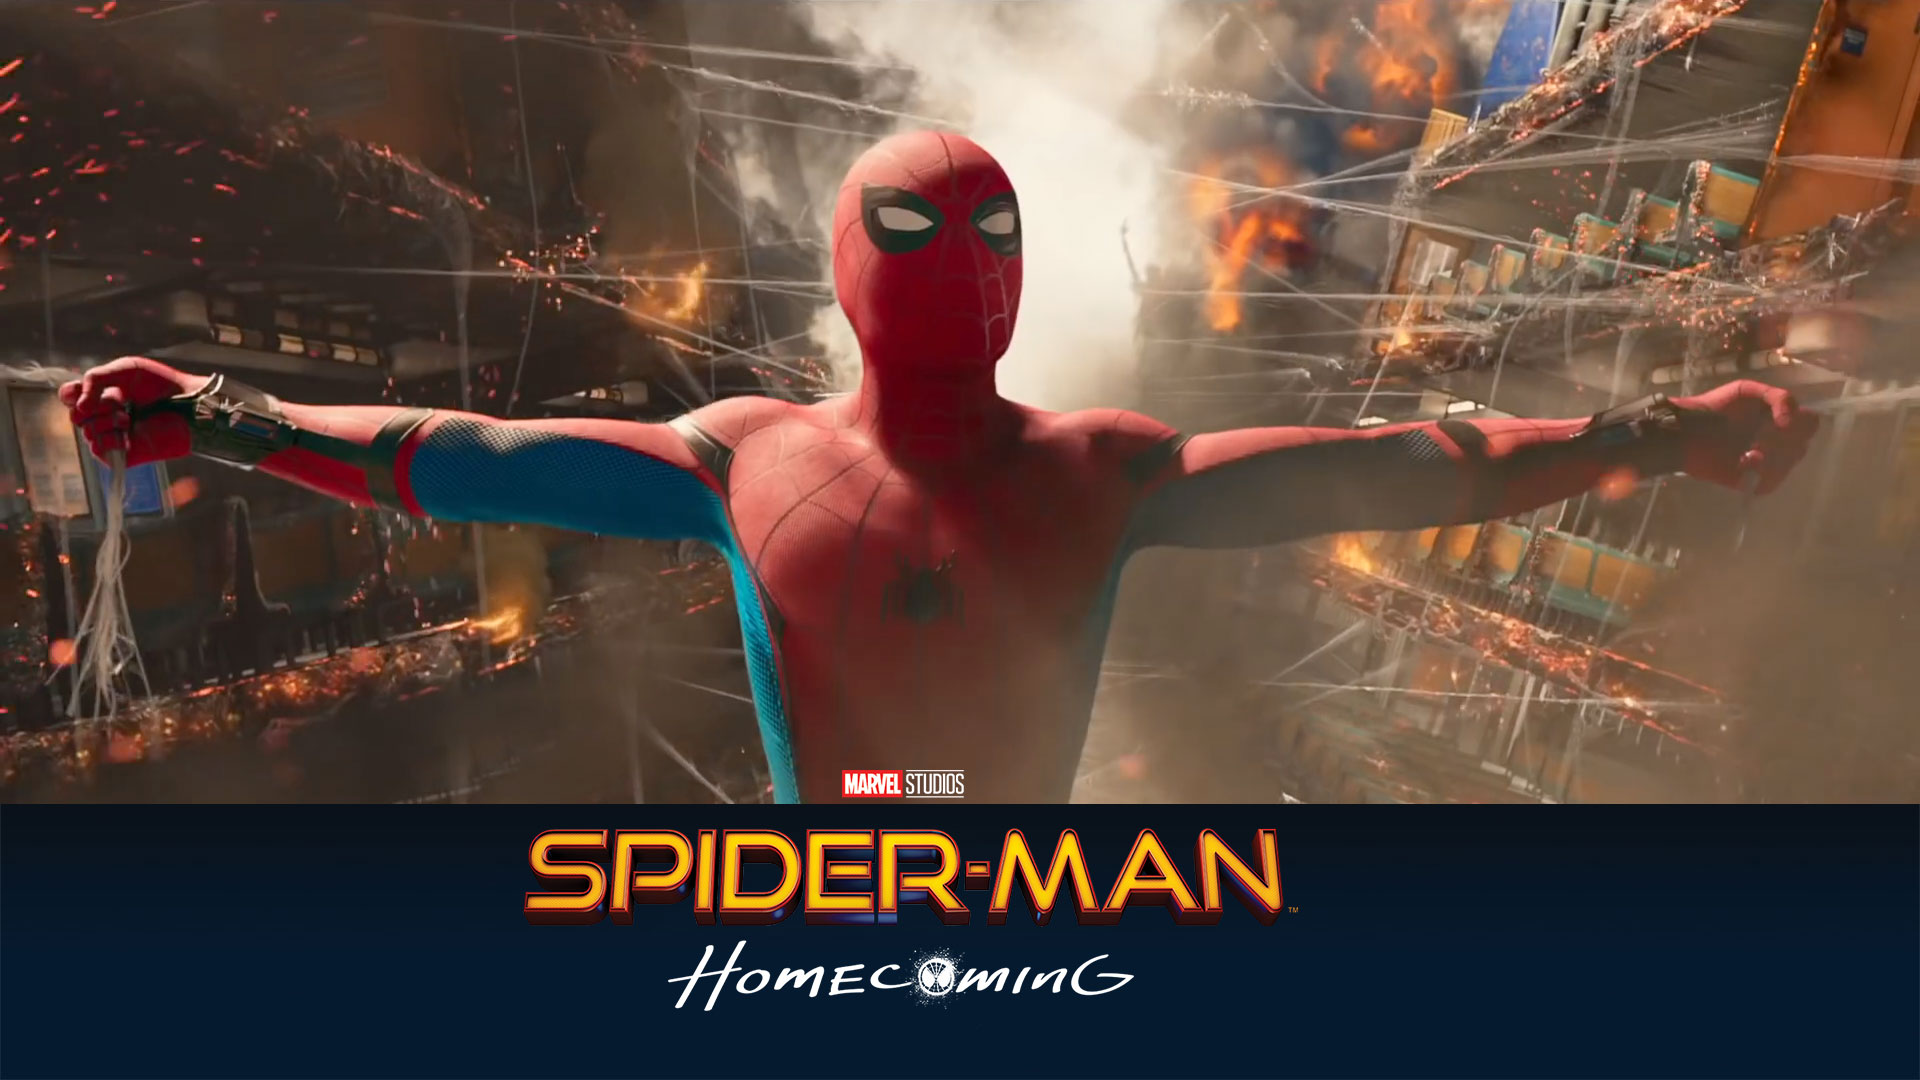 Spider-Man: Homecoming (2017) Movie | Desktop Wallpapers HD Quality